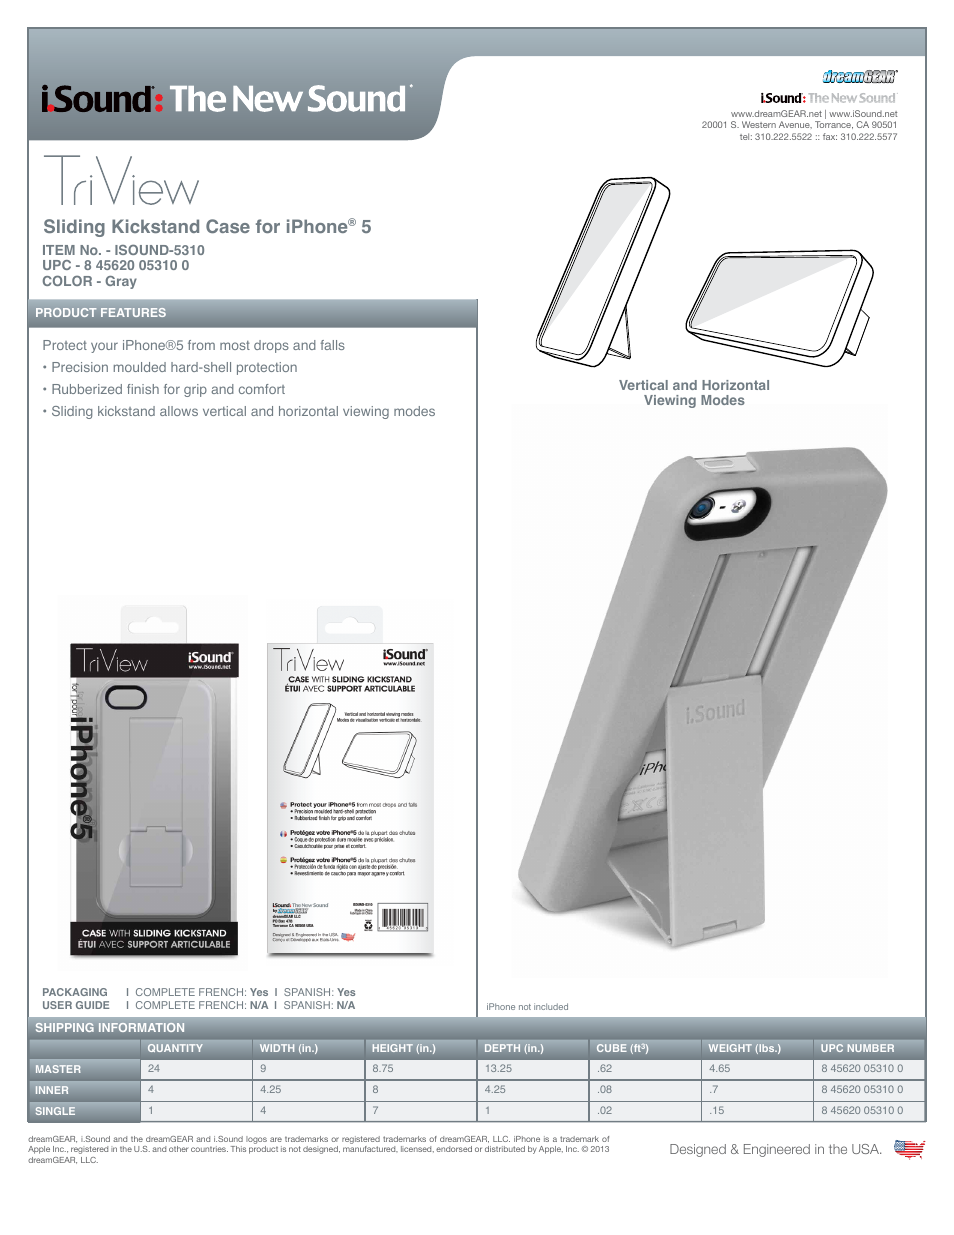 TriView for iPhone5 - Sell Sheet